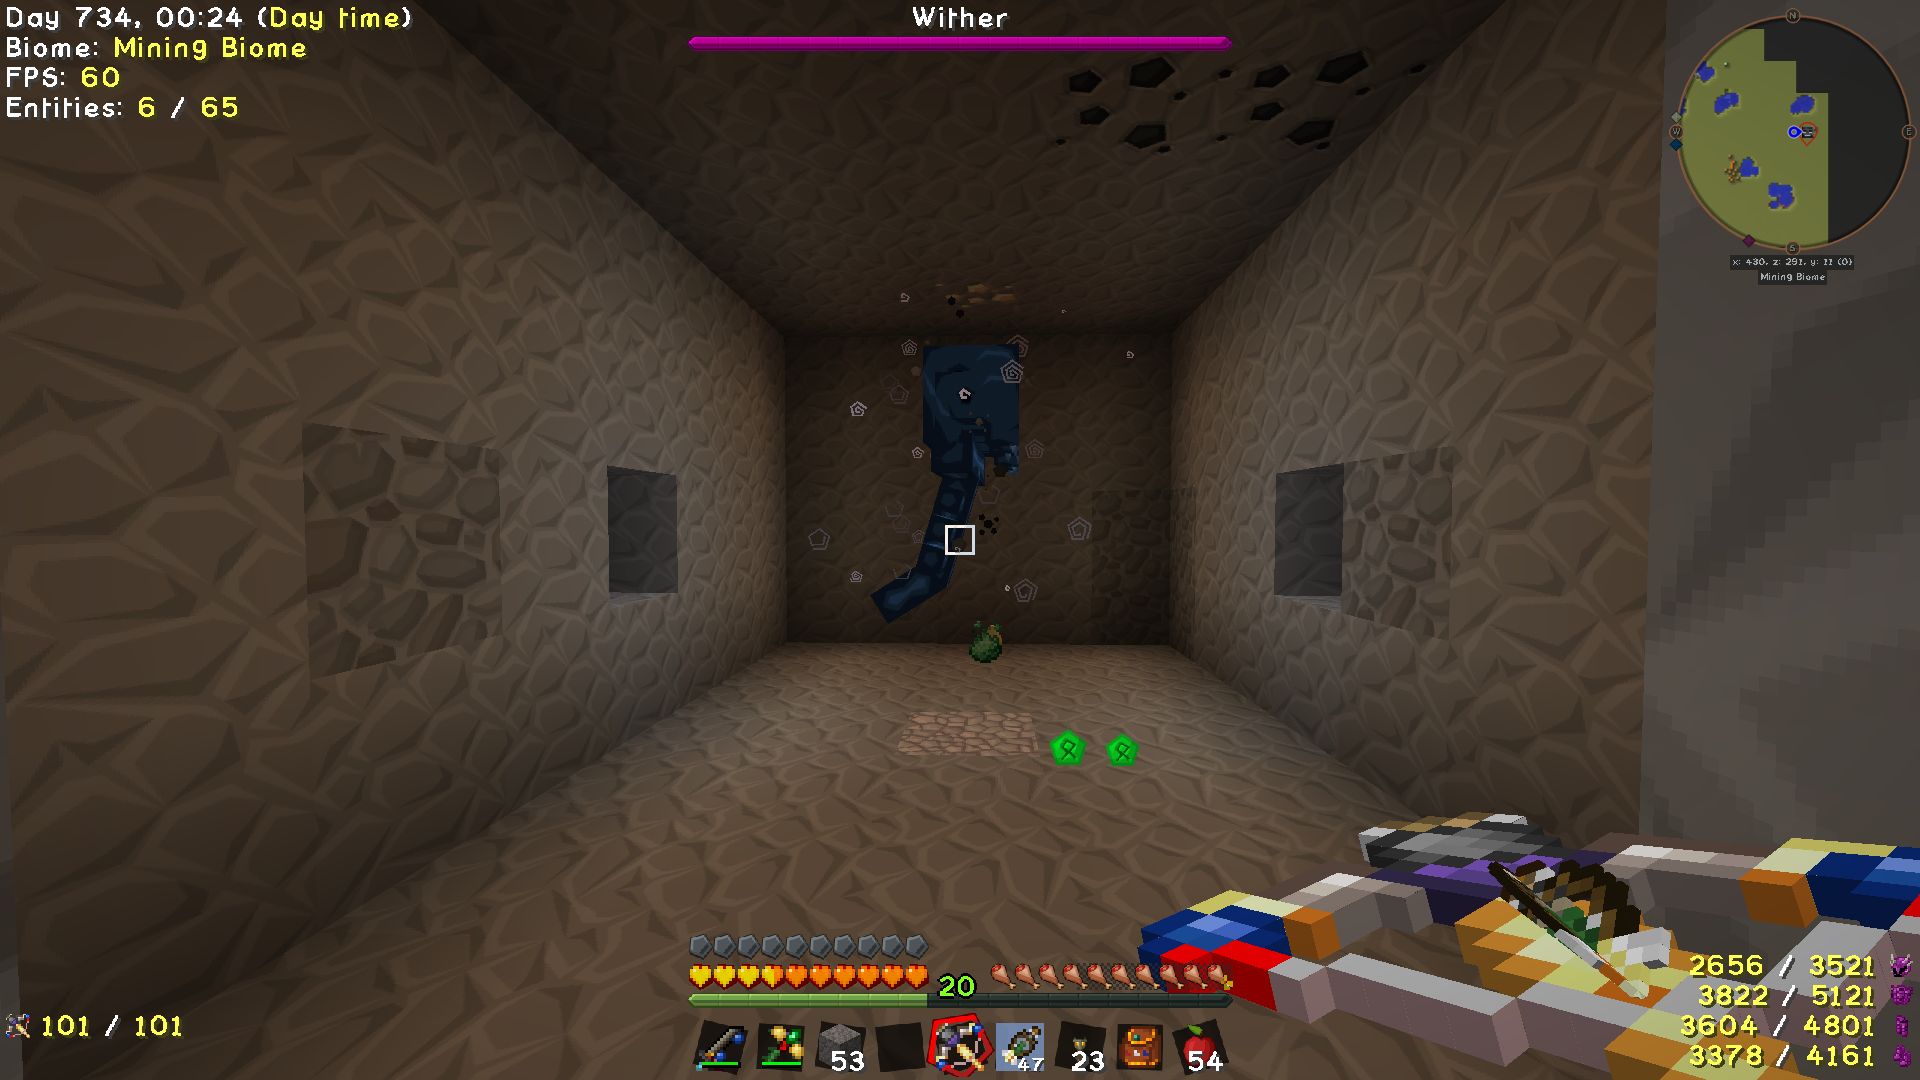 Second wither